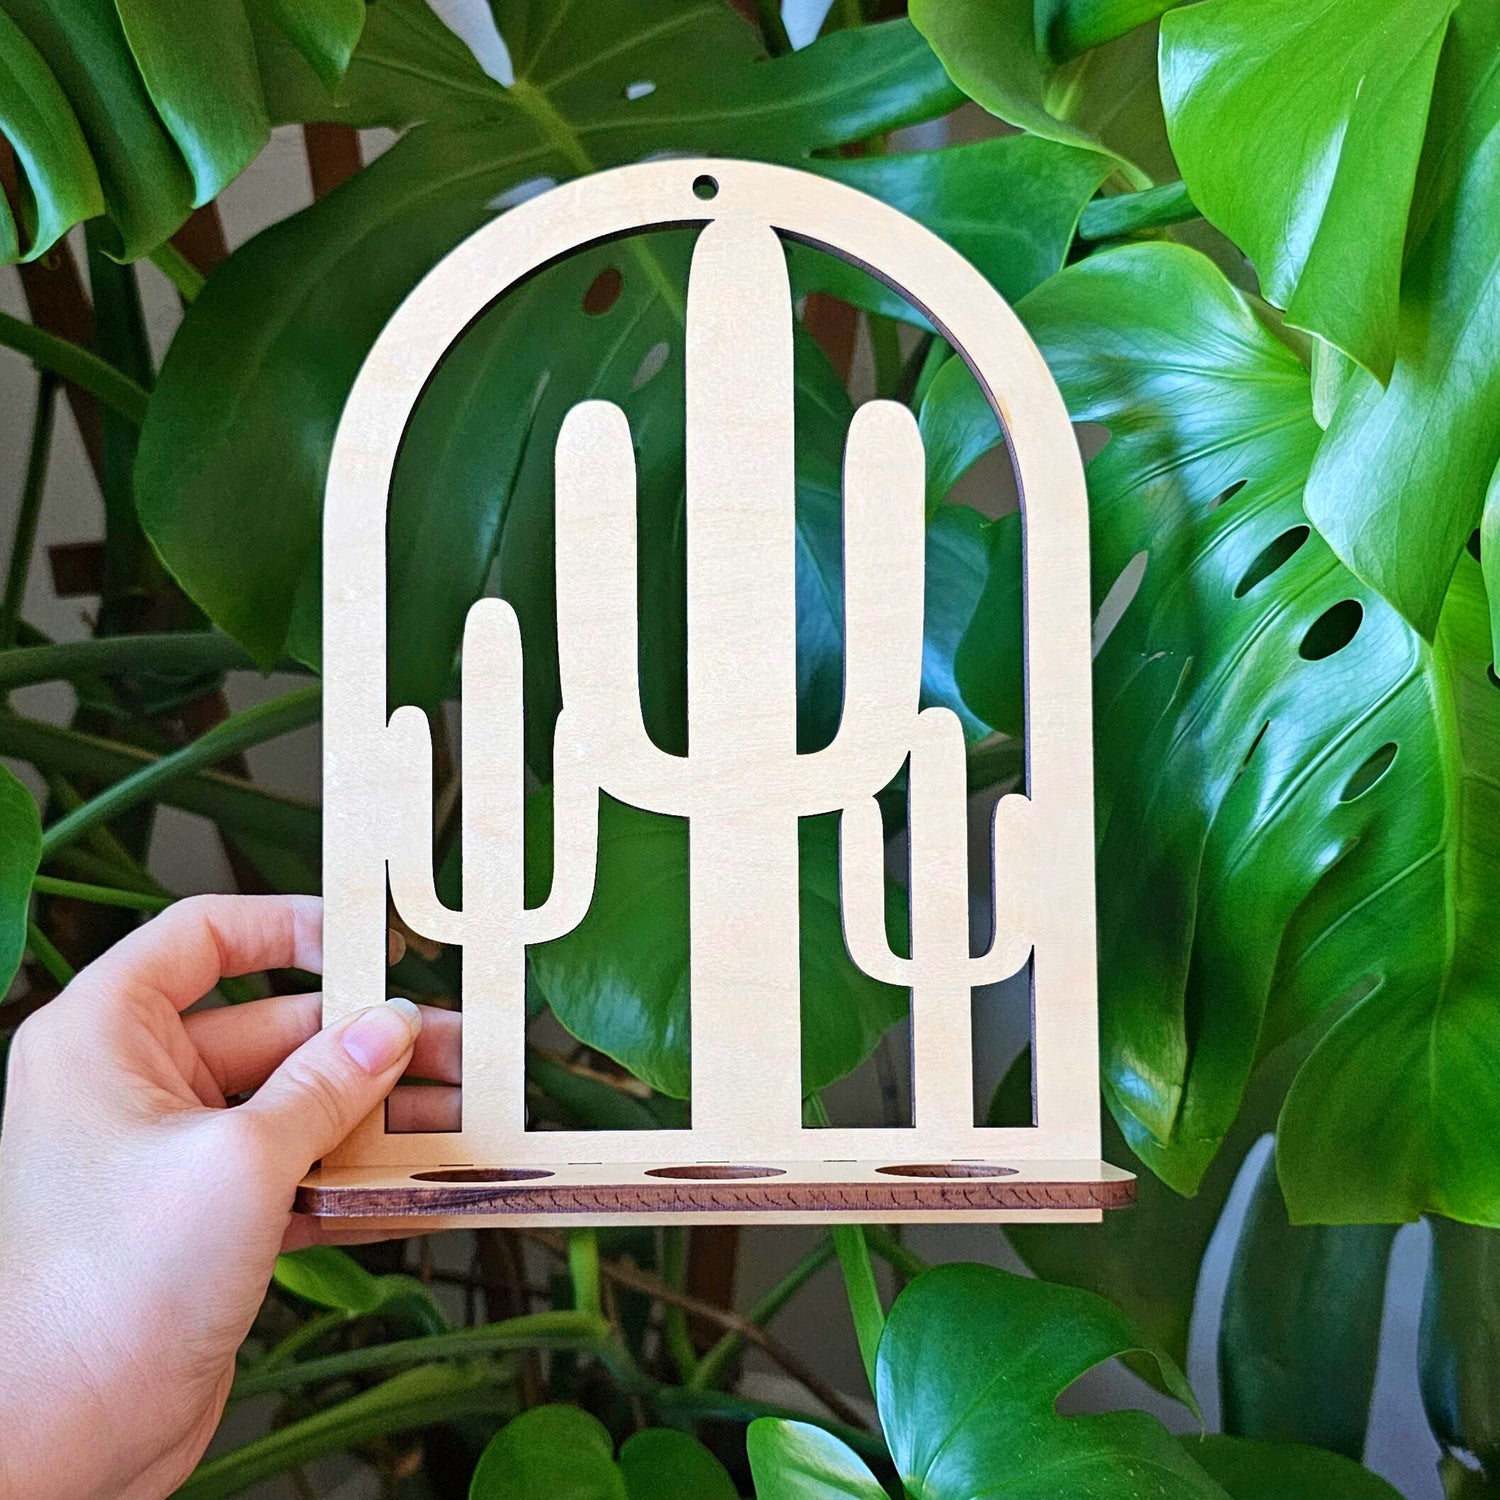 Wall mounted hanging propagation station for growing plant cuttings in water. Wood cut cactus design.